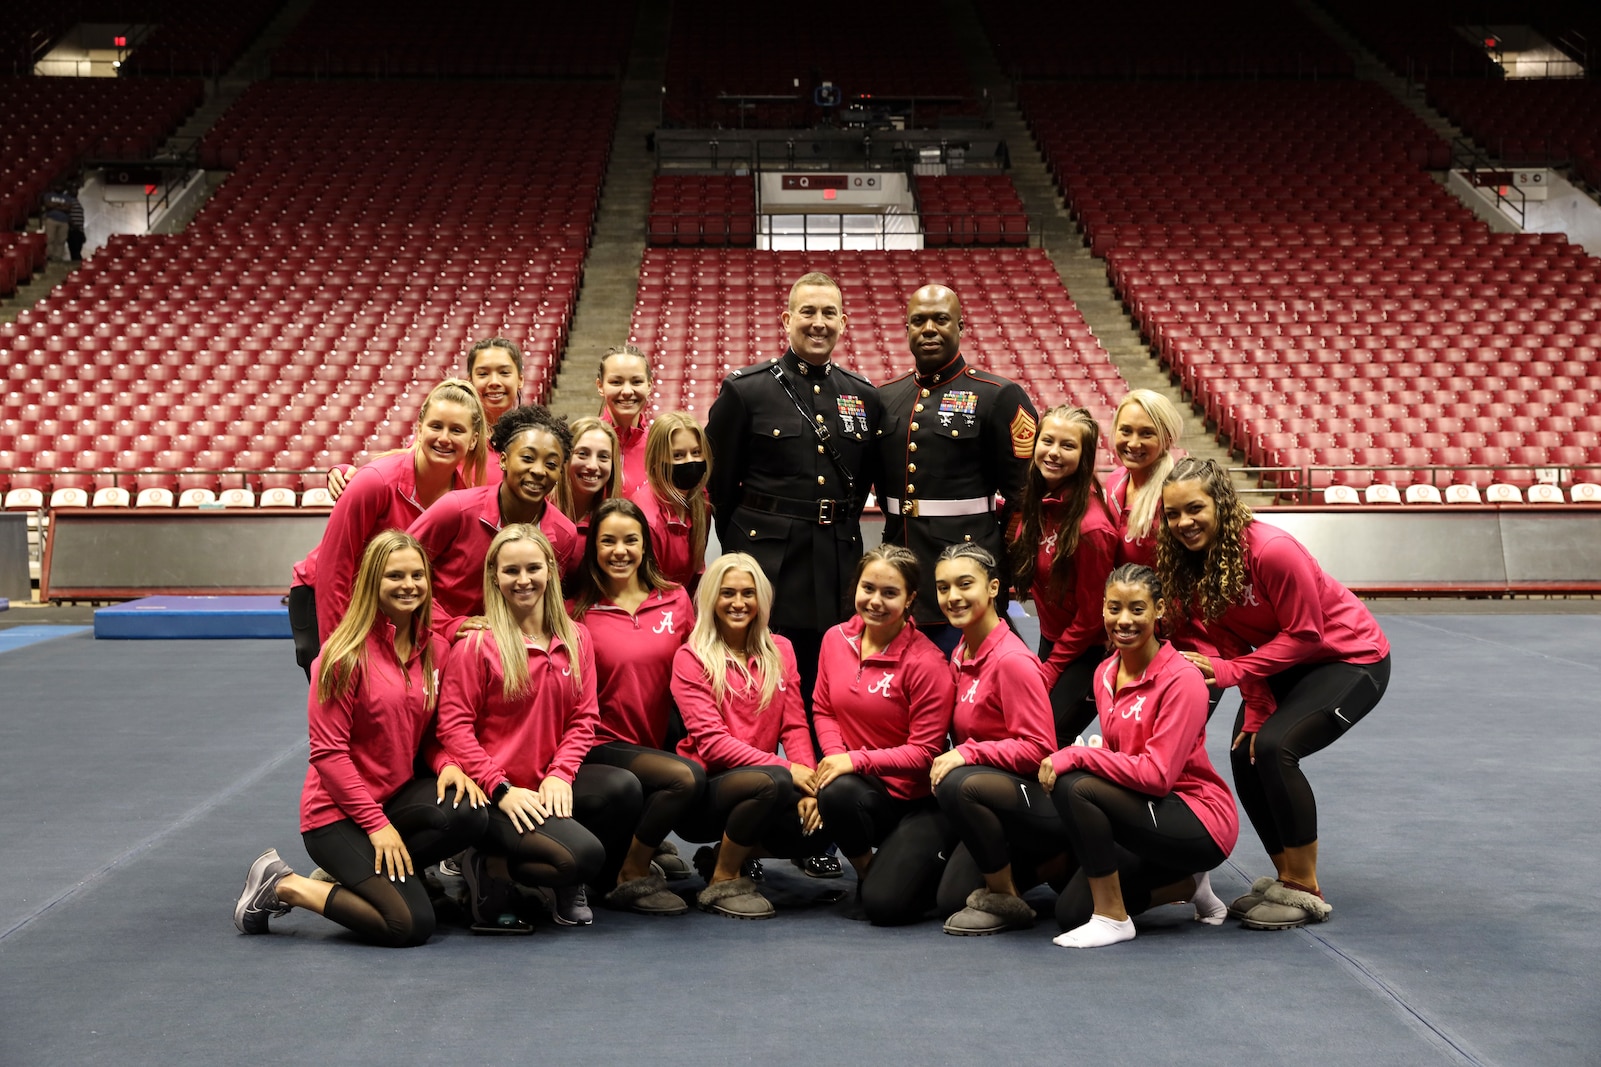 U.S. Marine Col. Lance J. Langfeldt (from left), the 6th Marine Corps District Commanding Officer, and Sgt. Maj. Frank O. Robinson, the 6th Marine Corps District Sergeant Major, stand for a photo with the University of Alabama Gymnastics team in Tuscaloosa Alabama, February 11, 2022. The Marines from 6th Marine Corps District spoke with the team about the importance of leadership and their role in the community.